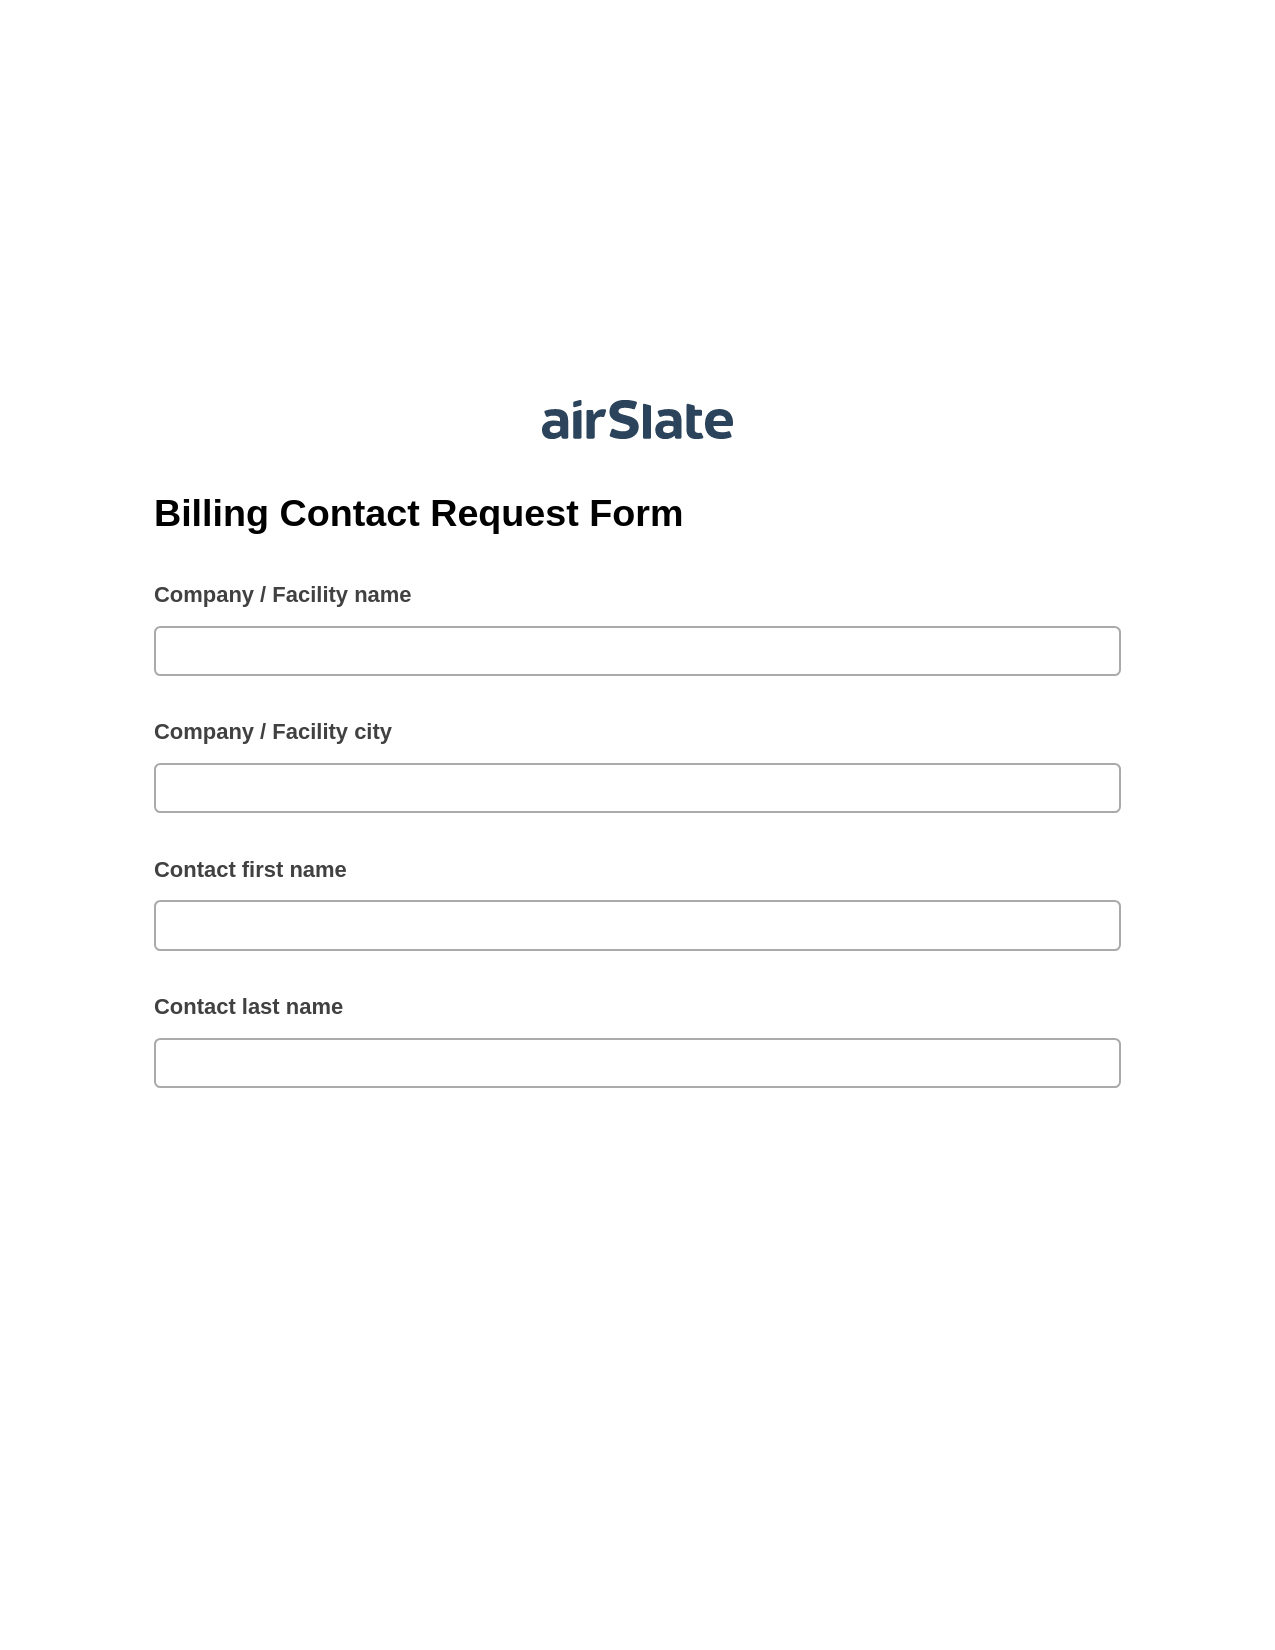 Multirole Billing Contact Request Form Pre-fill Document Bot, Google Cloud Print Bot, Export to Formstack Documents Bot